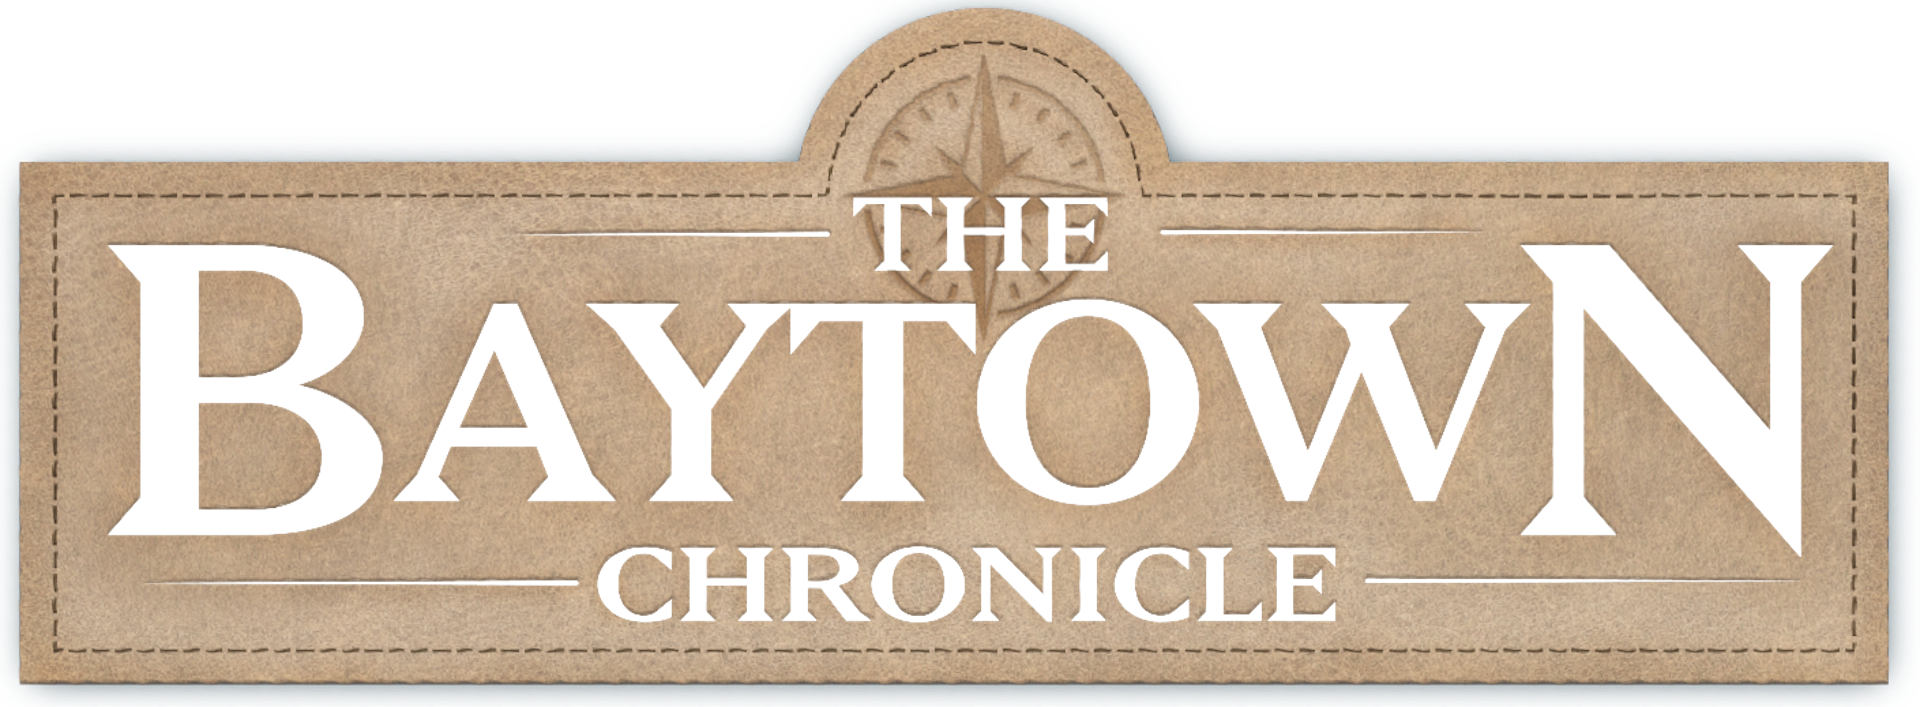 The Baytown Chronicle